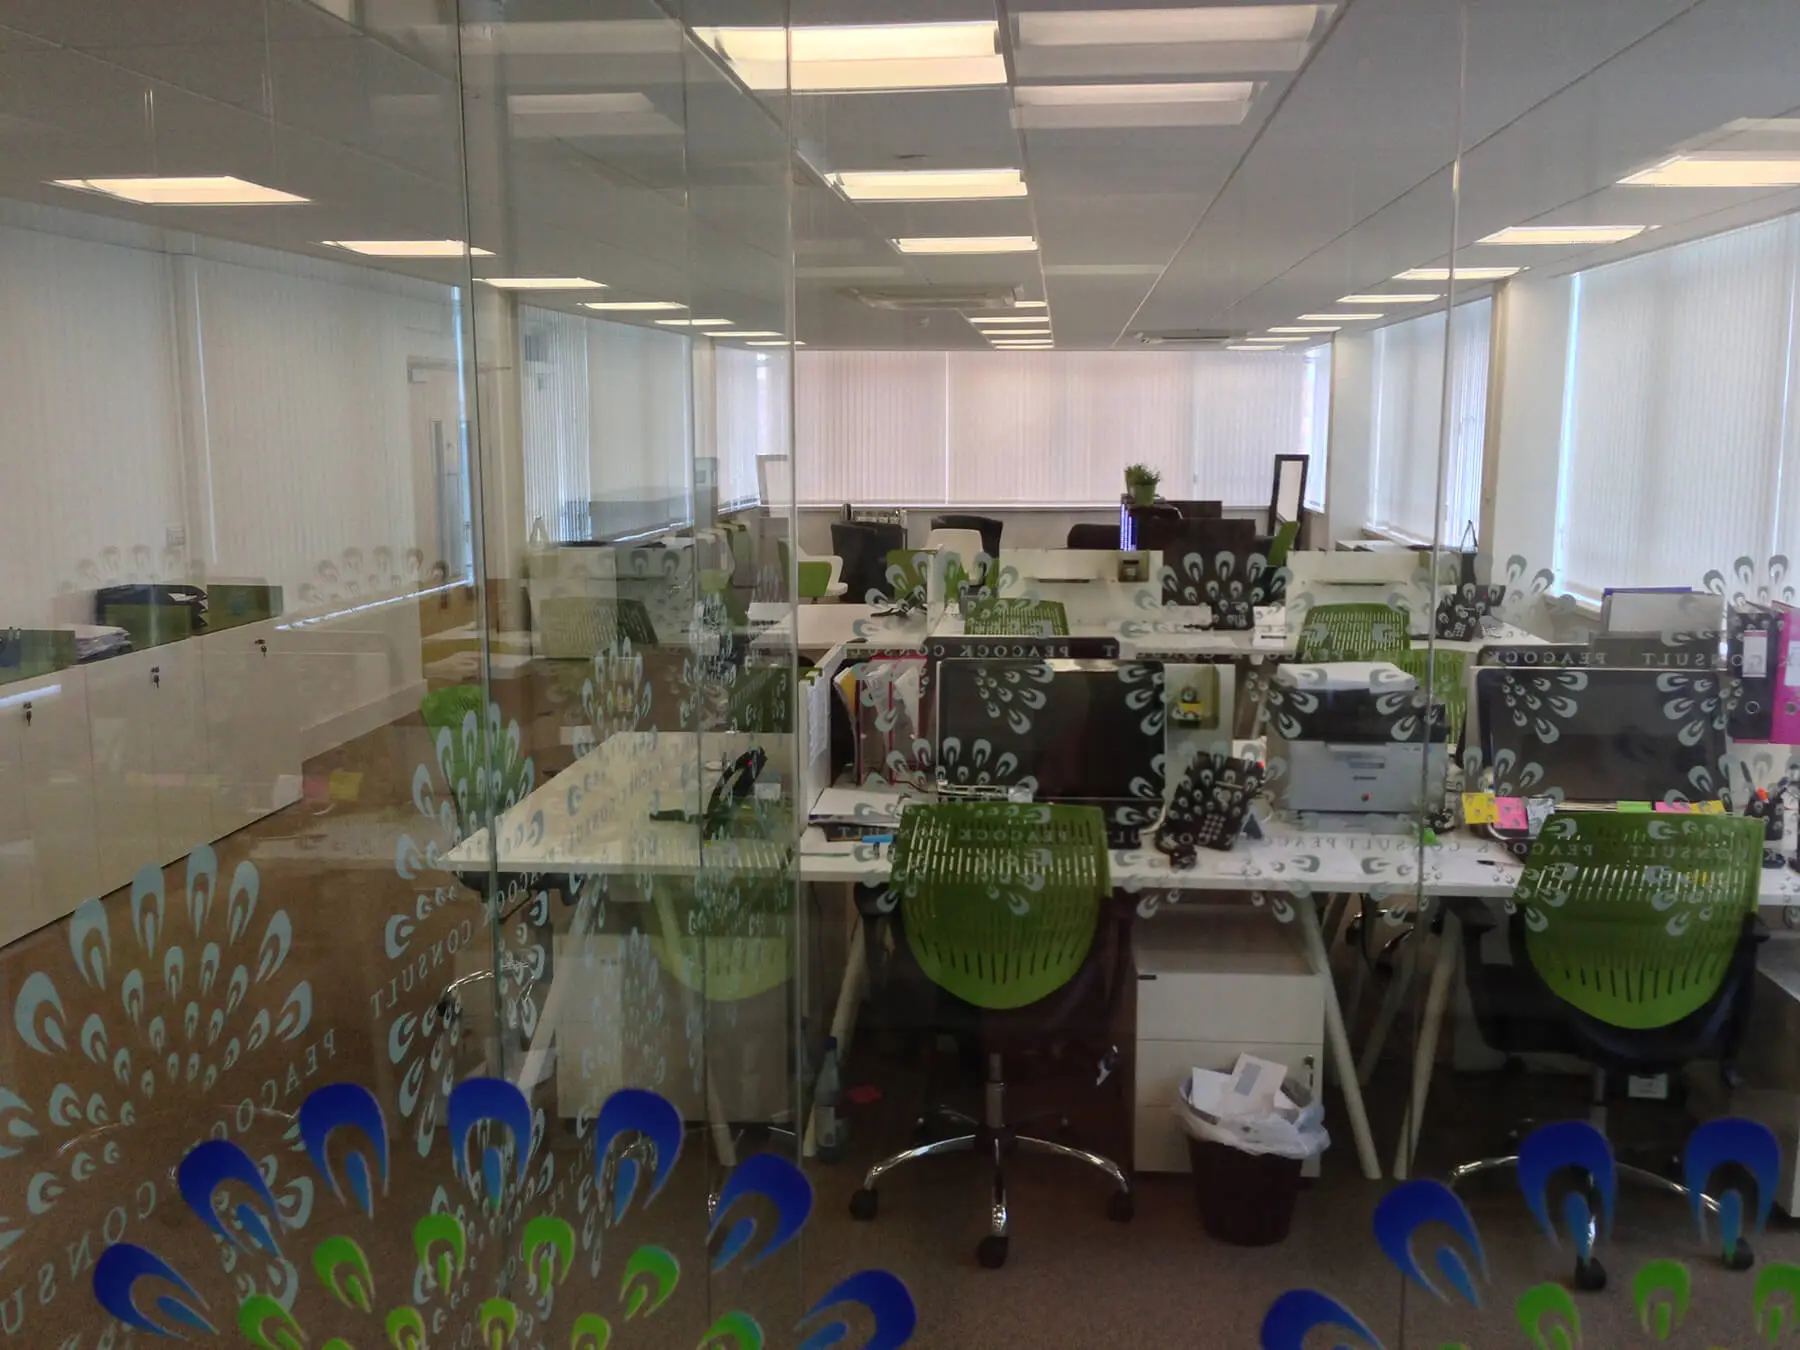 Back to office desks with chairs and pedestals and logo designed glass screens